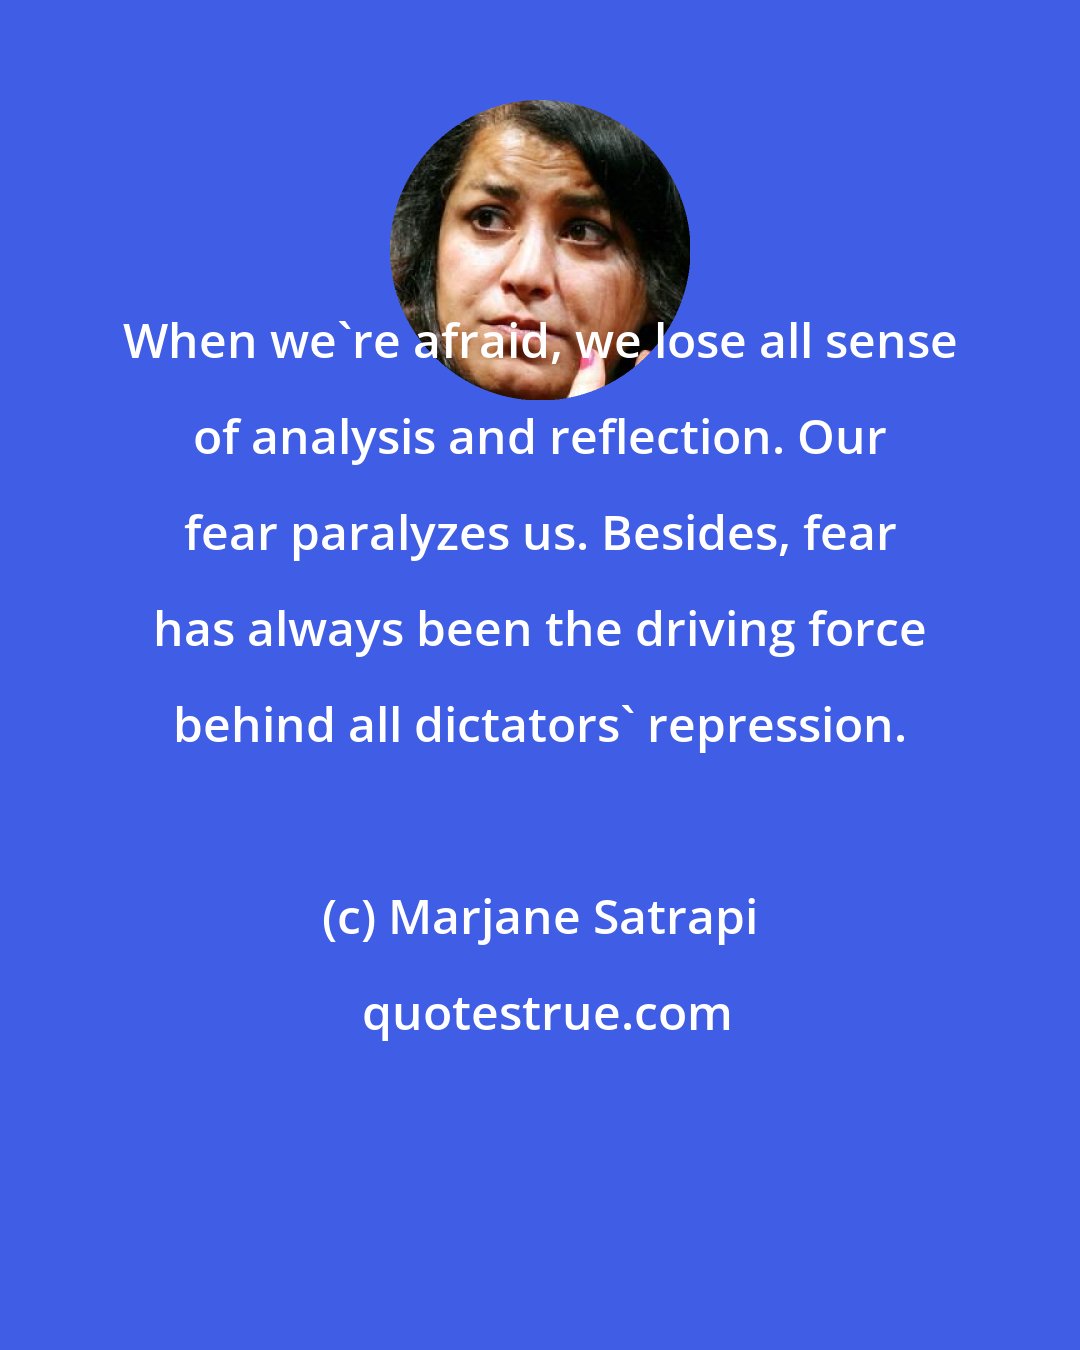 Marjane Satrapi: When we're afraid, we lose all sense of analysis and reflection. Our fear paralyzes us. Besides, fear has always been the driving force behind all dictators' repression.